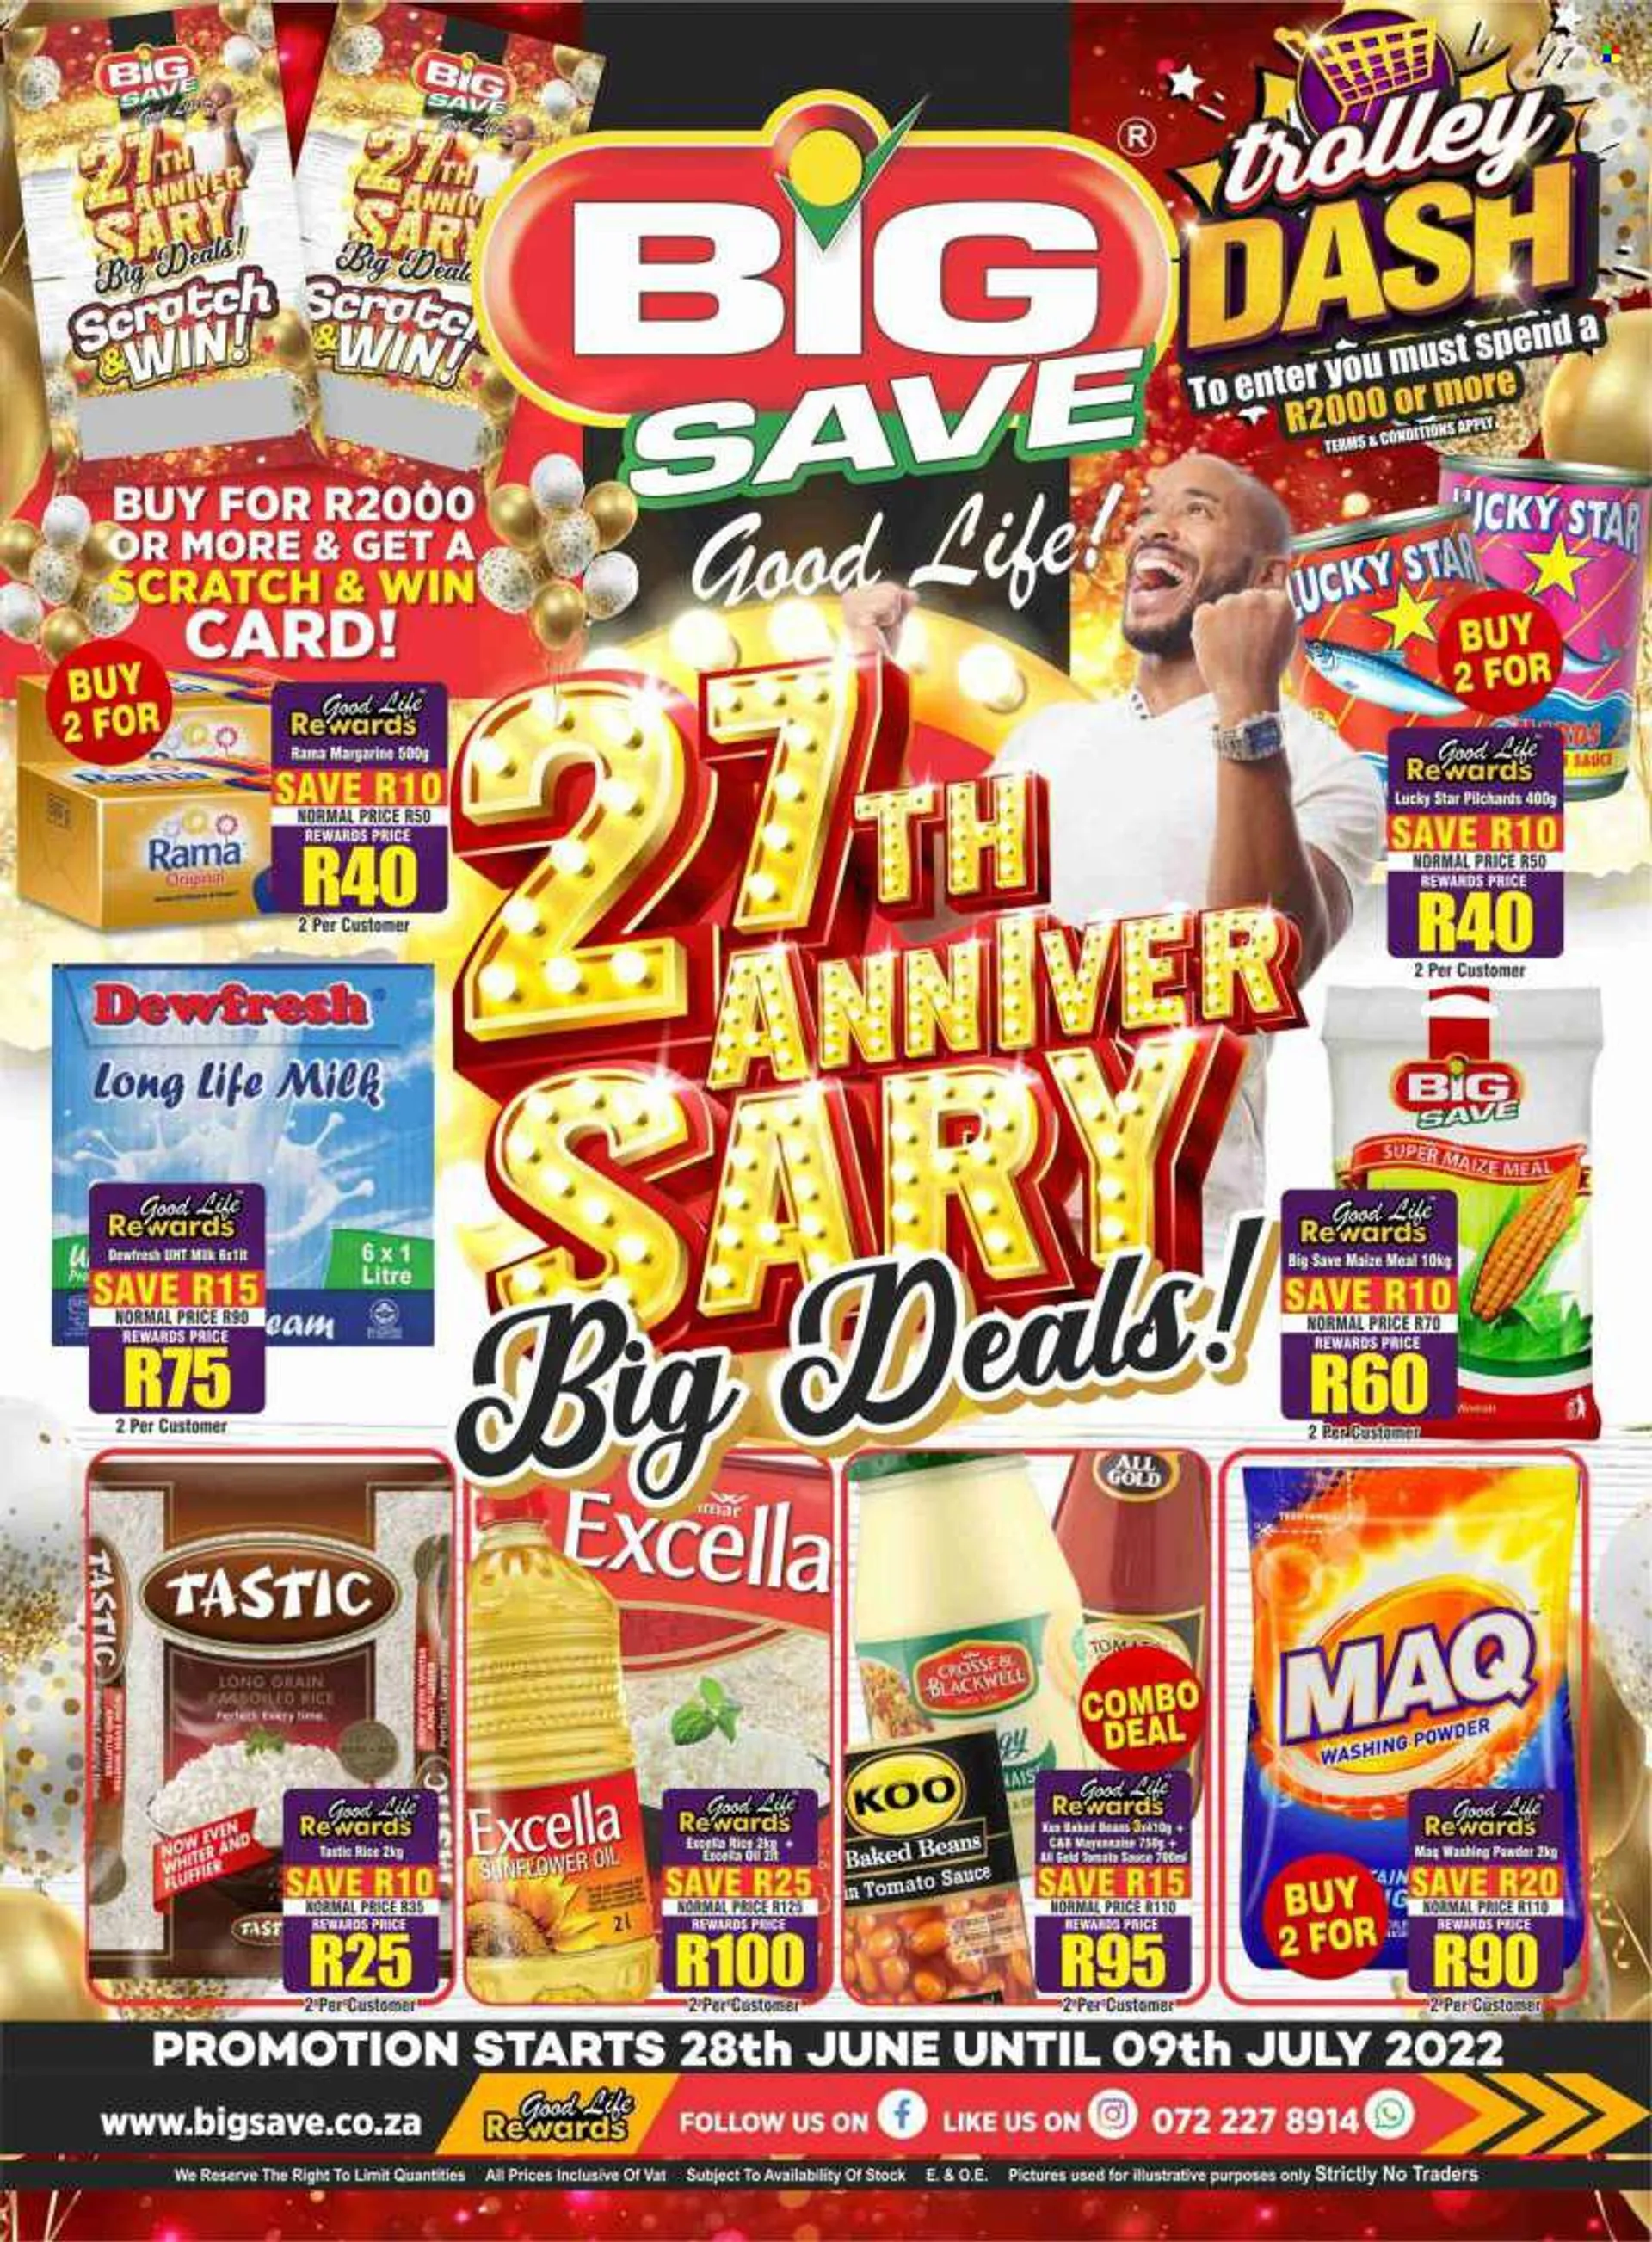 Big Save catalogue  - 28/06/2022 - 09/07/2022 - Sales products - beans, sardines, milk, long life milk, margarine, Rama, mayonnaise, maize meal, baked beans, Koo, rice, parboiled rice, Tastic, Good Life, sunflower oil, oil, laundry powder, trolley. Page 1